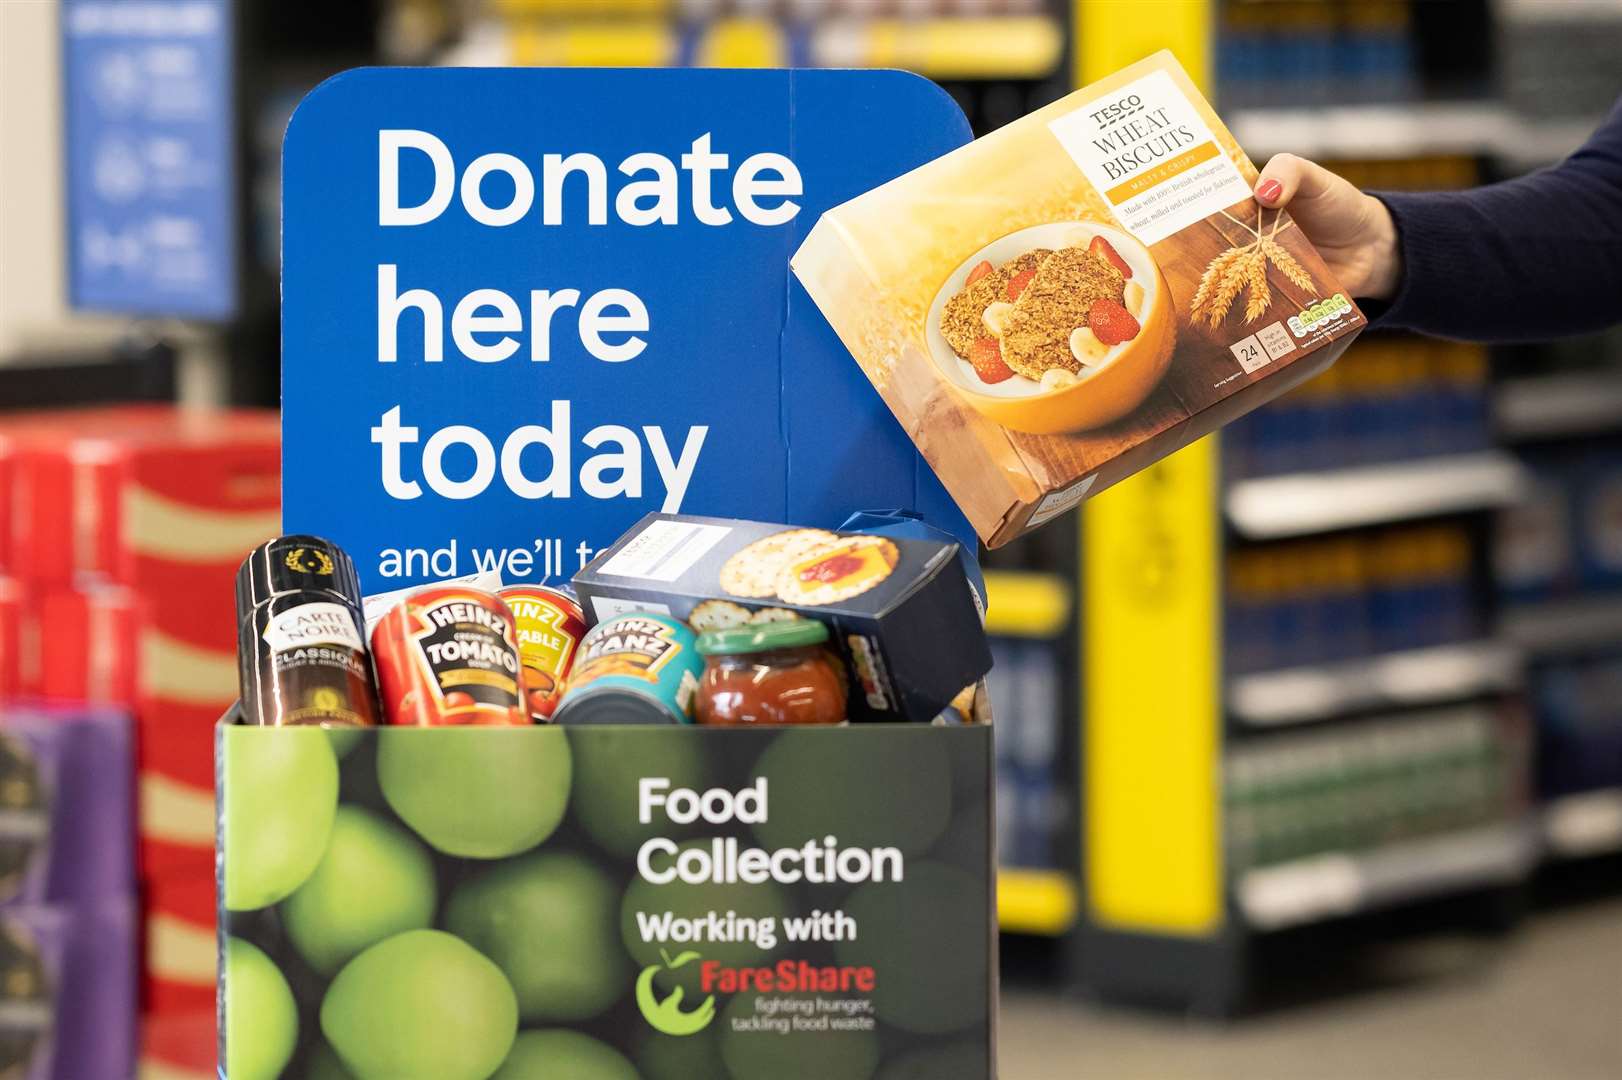 Tesco collection point for food donations.